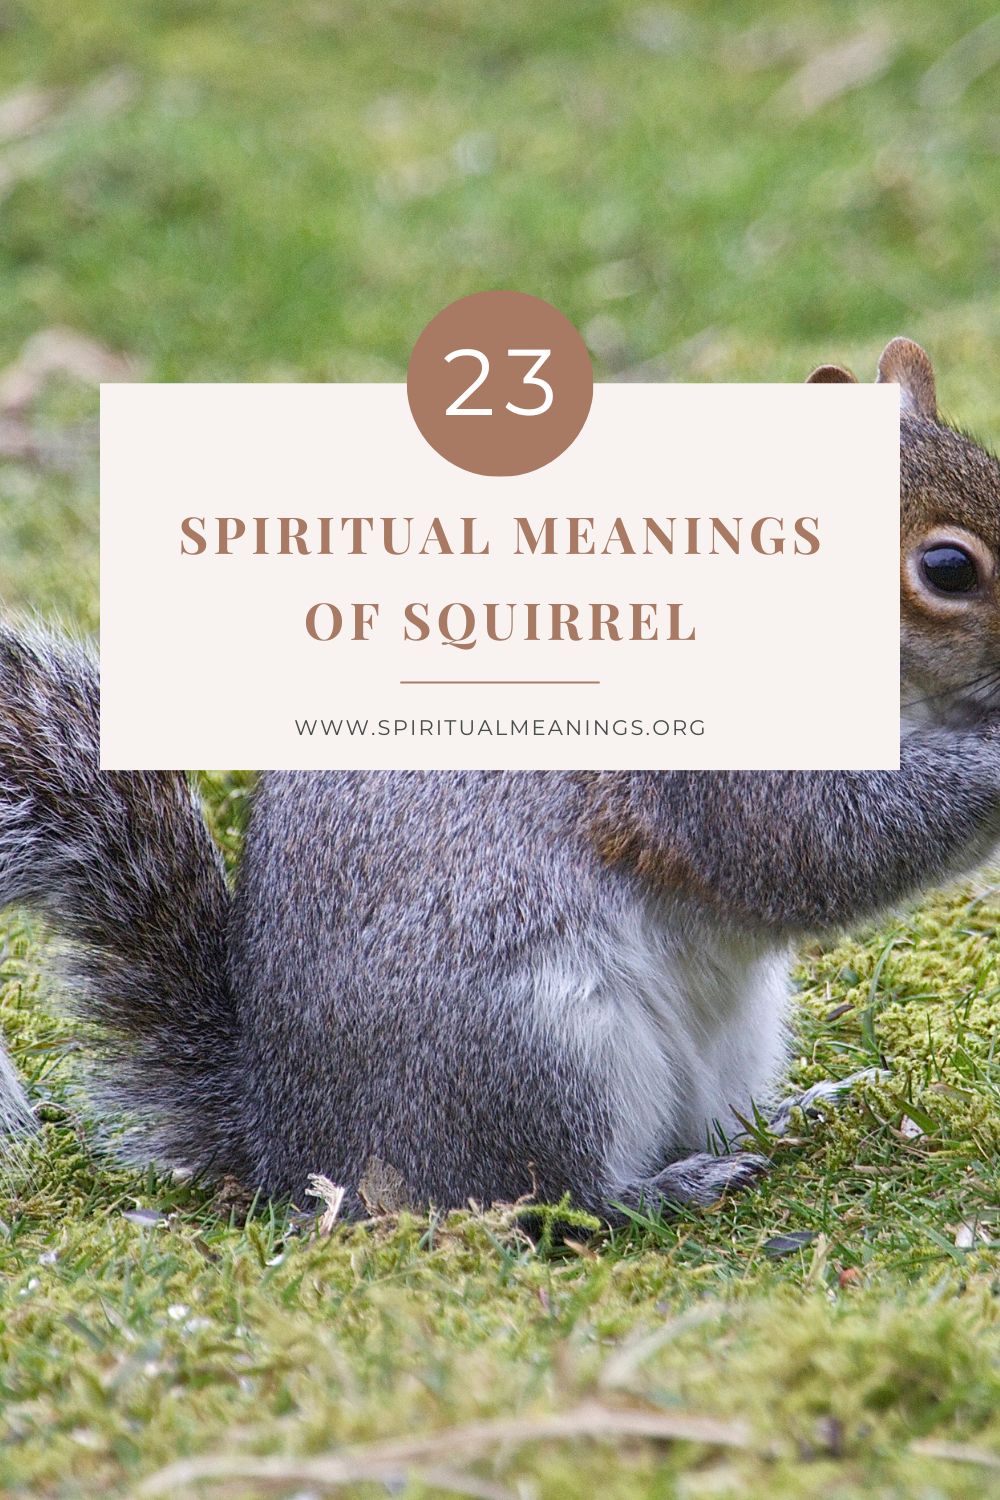  Spiritual Meanings of Squirrel